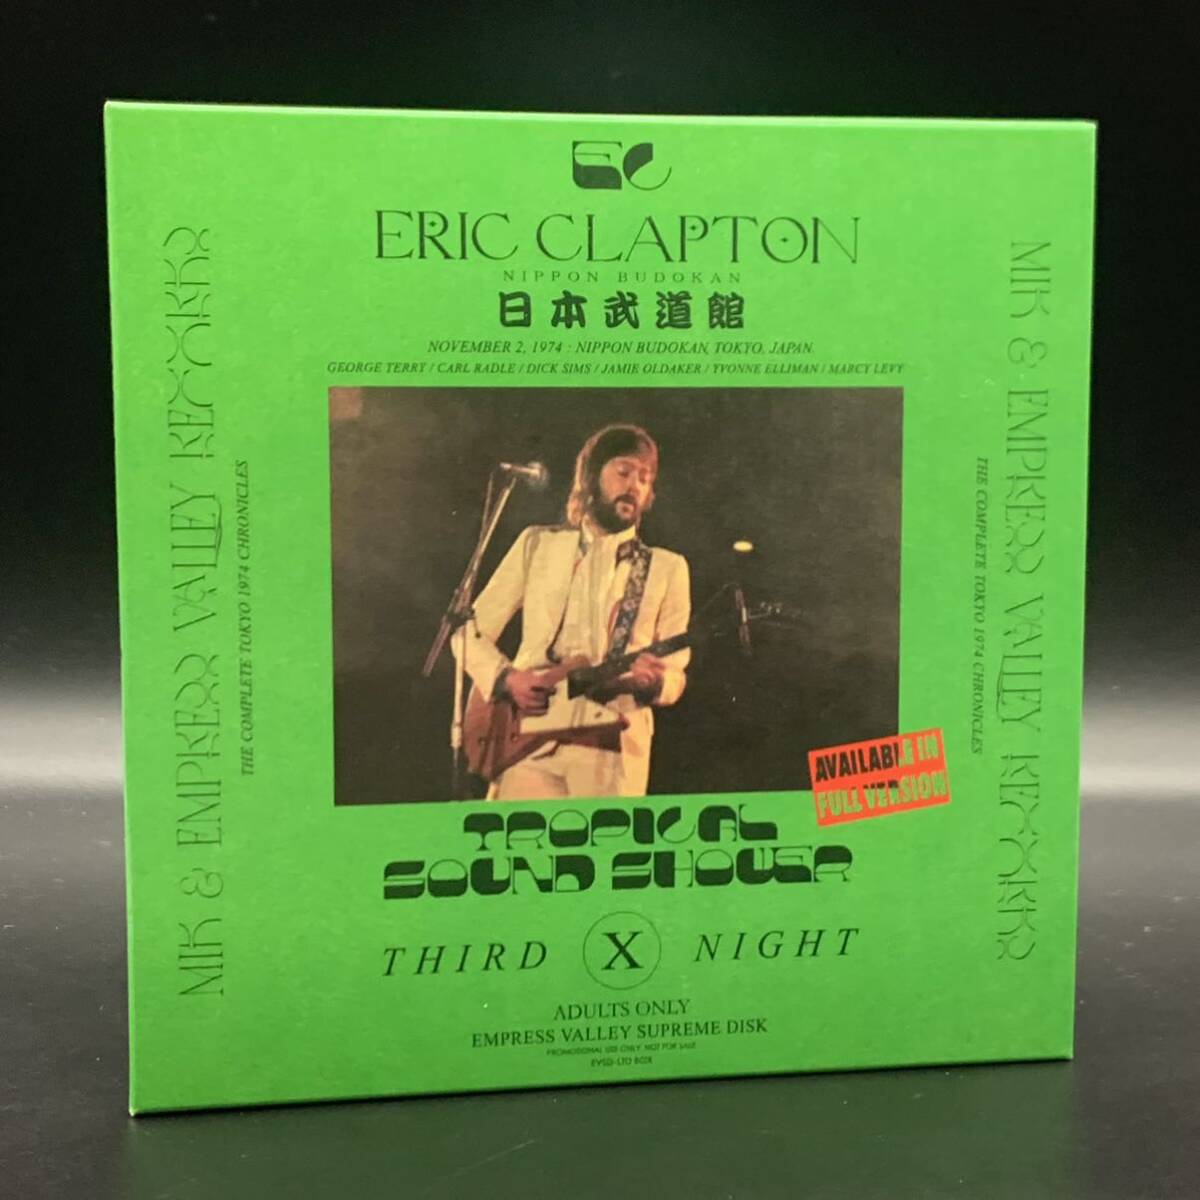 ERIC CLAPTON / TROPICAL SOUND SHOWER「亜熱帯武道館」(6CD BOX with Booklet) 初来日武道館3公演を全て初登場音源で収録！完売品！の画像7